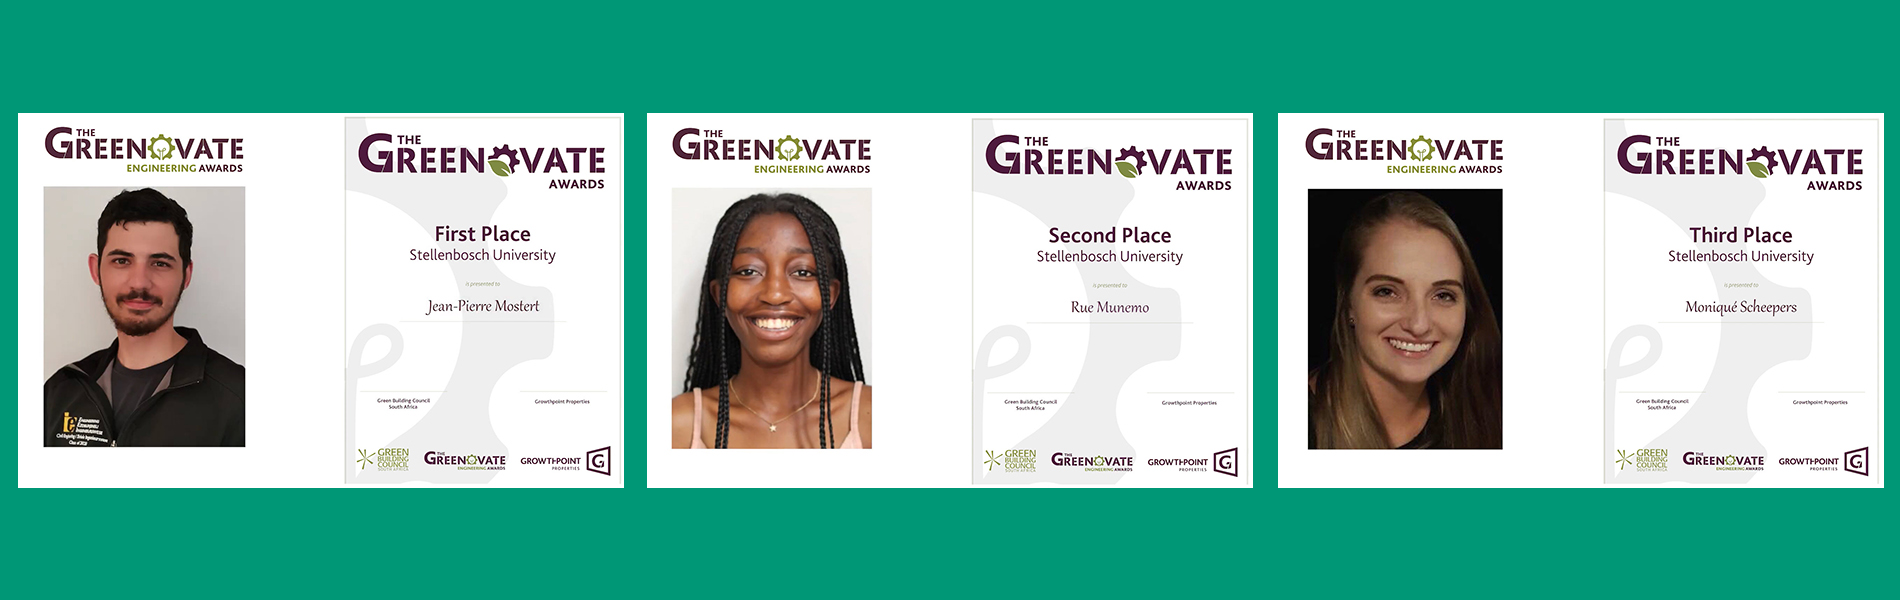 Greenovate Awards Competition